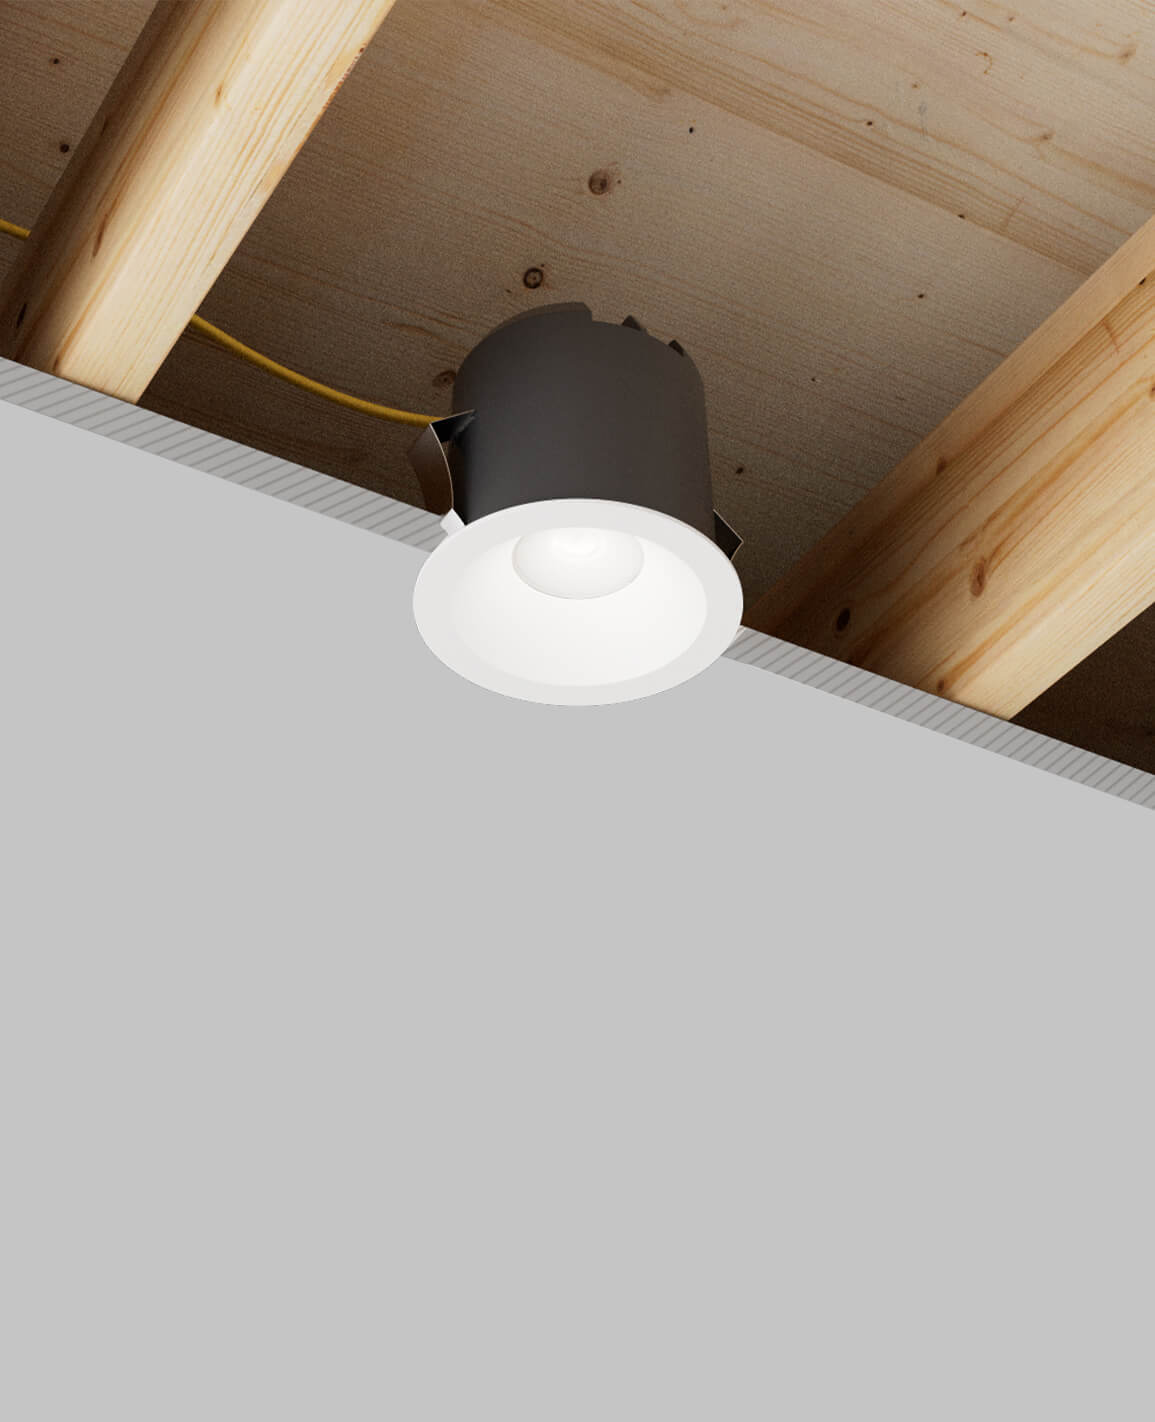 4" LUSA recessed light with remodel housing and white round trim